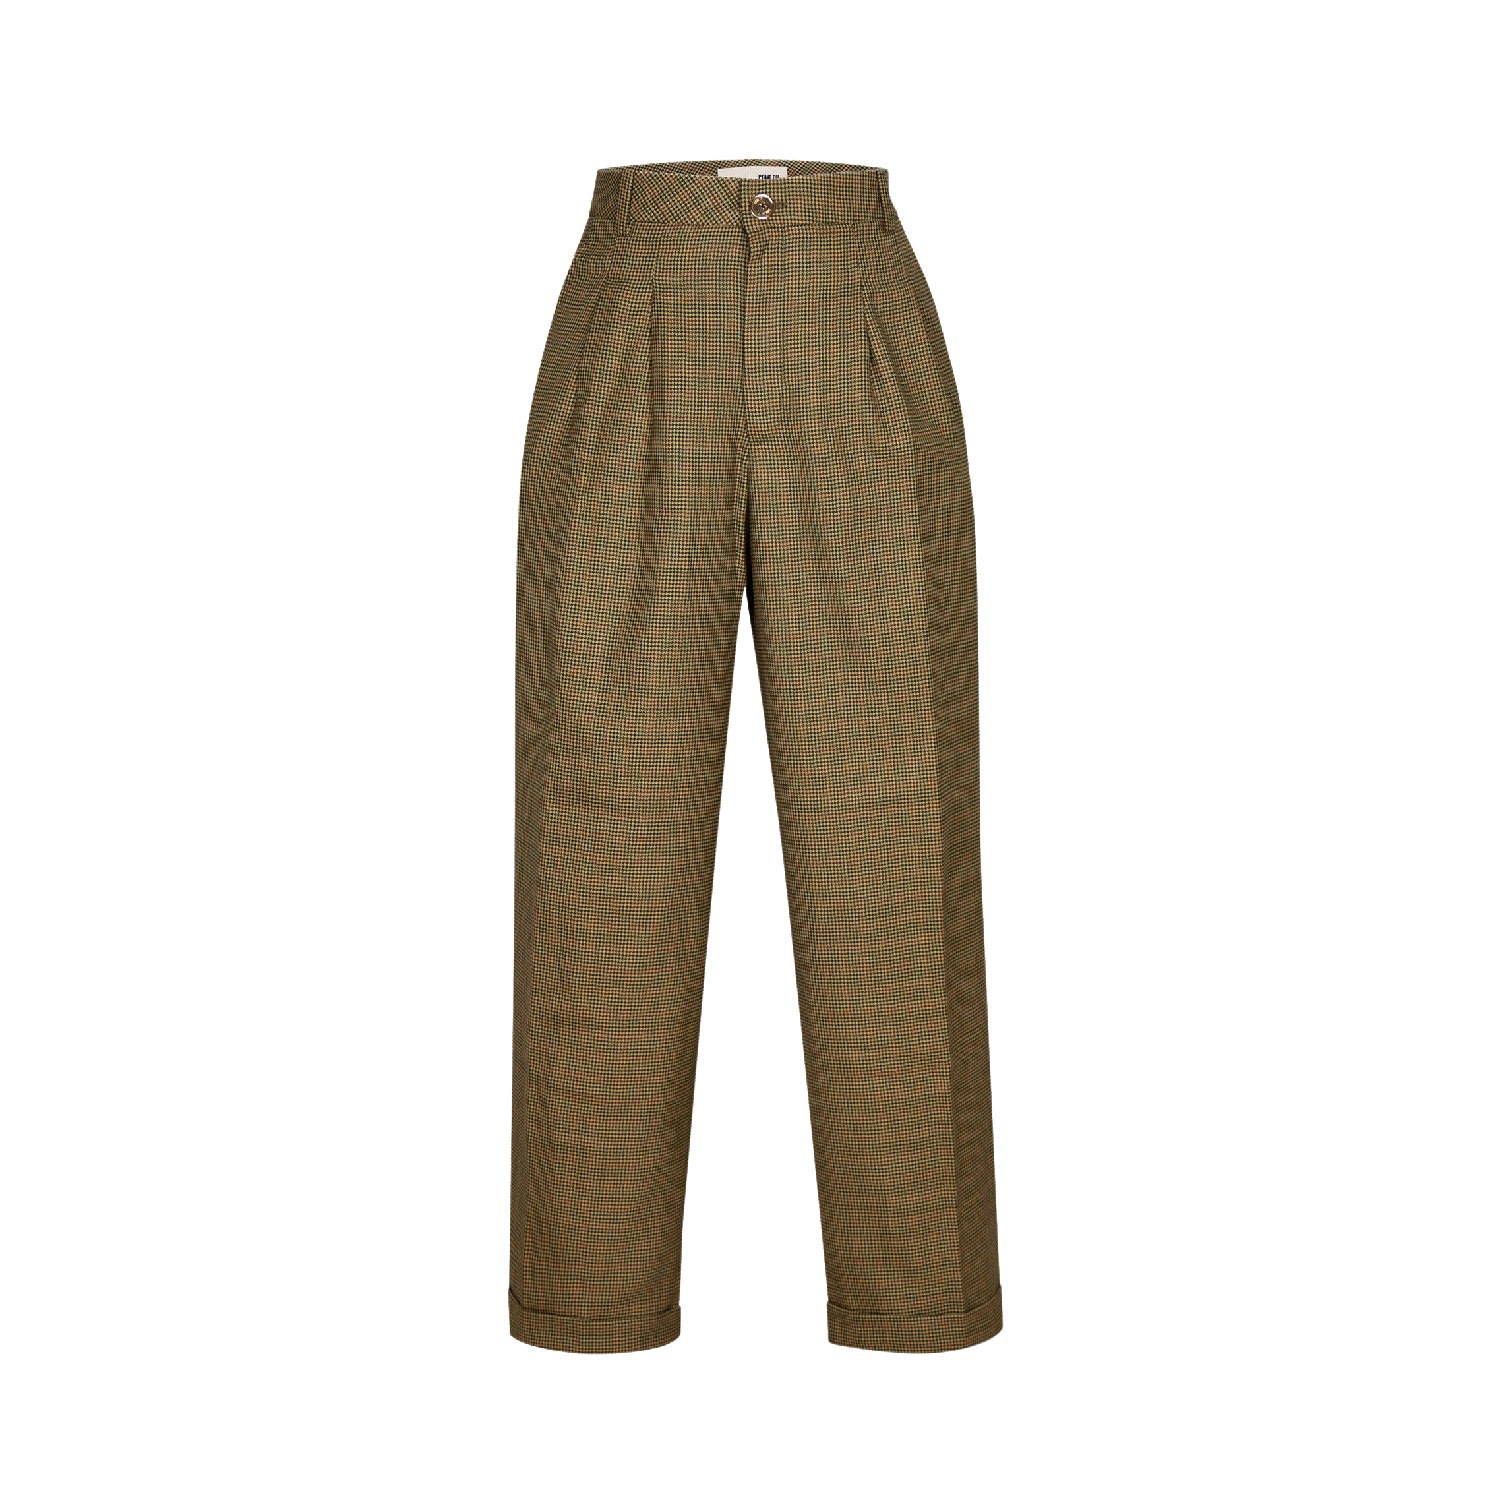 Winston Trouser Brown Women Extra Small Come on